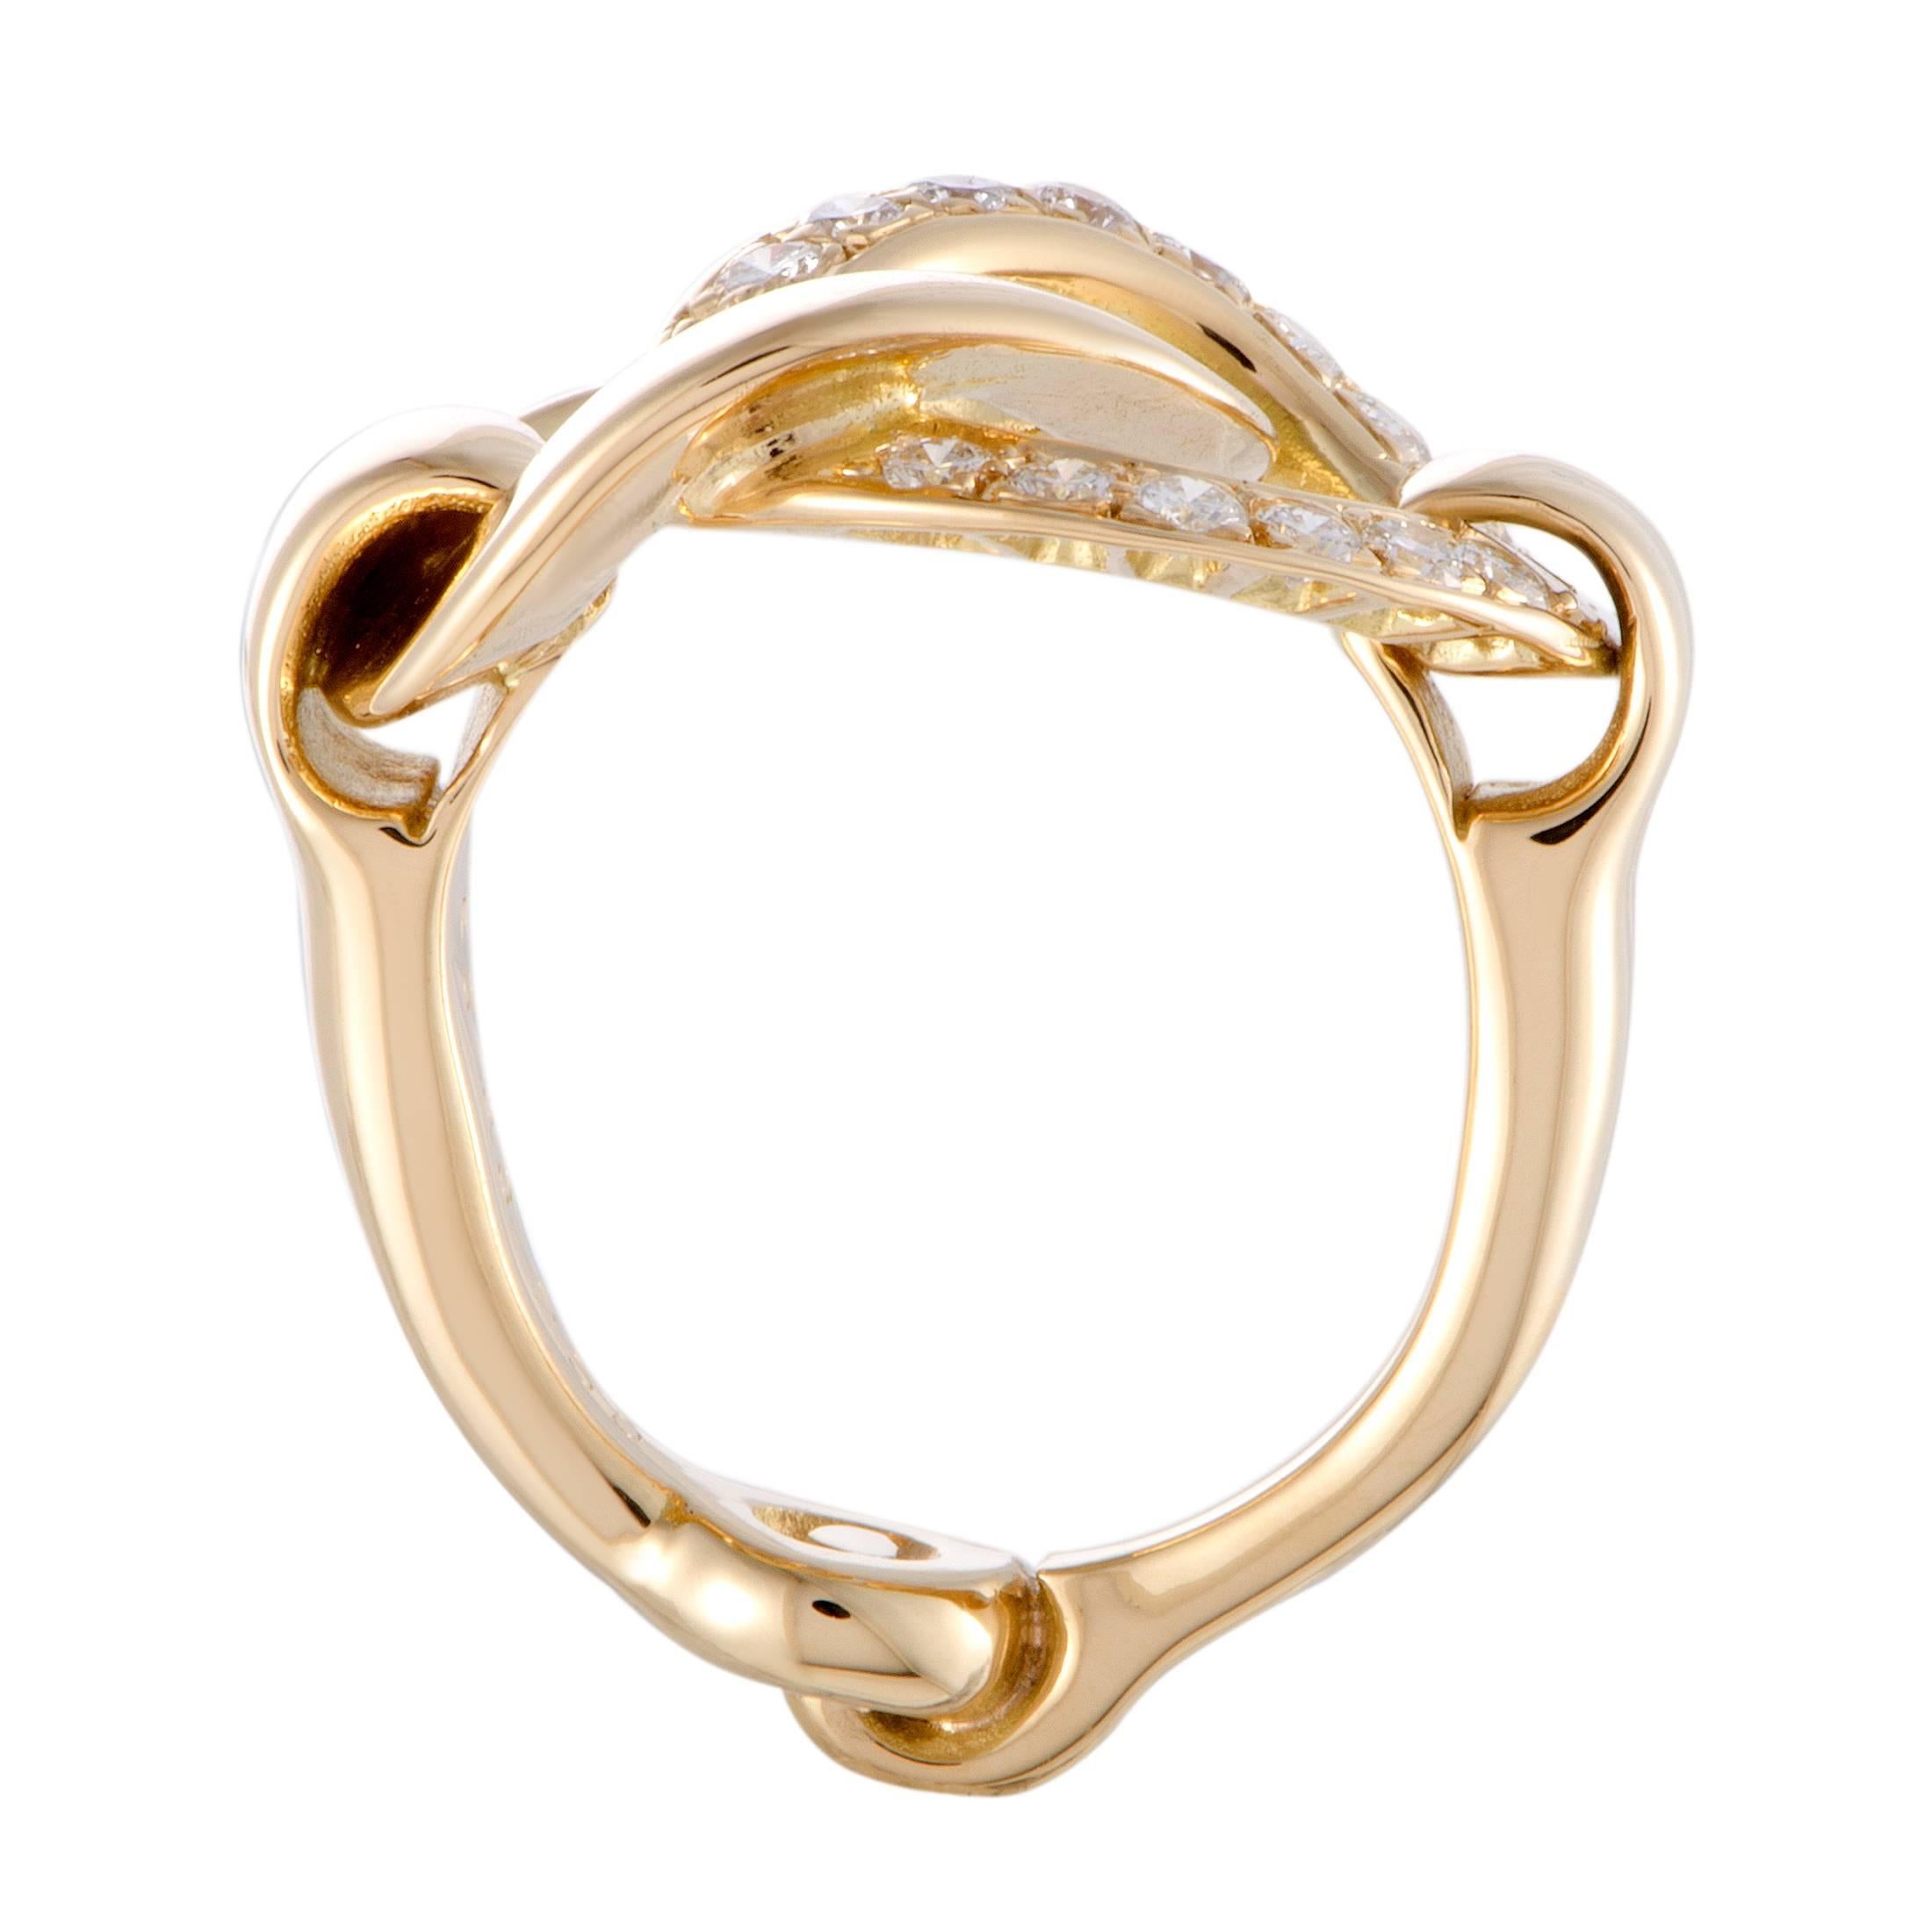 Bringing out the luxurious resplendence of diamonds in an exceptionally attractive manner, the alluring gleam of yellow gold gives a splendidly prestigious look to this fabulous ring. The ring is beautifully designed by Hermès, and it is expertly